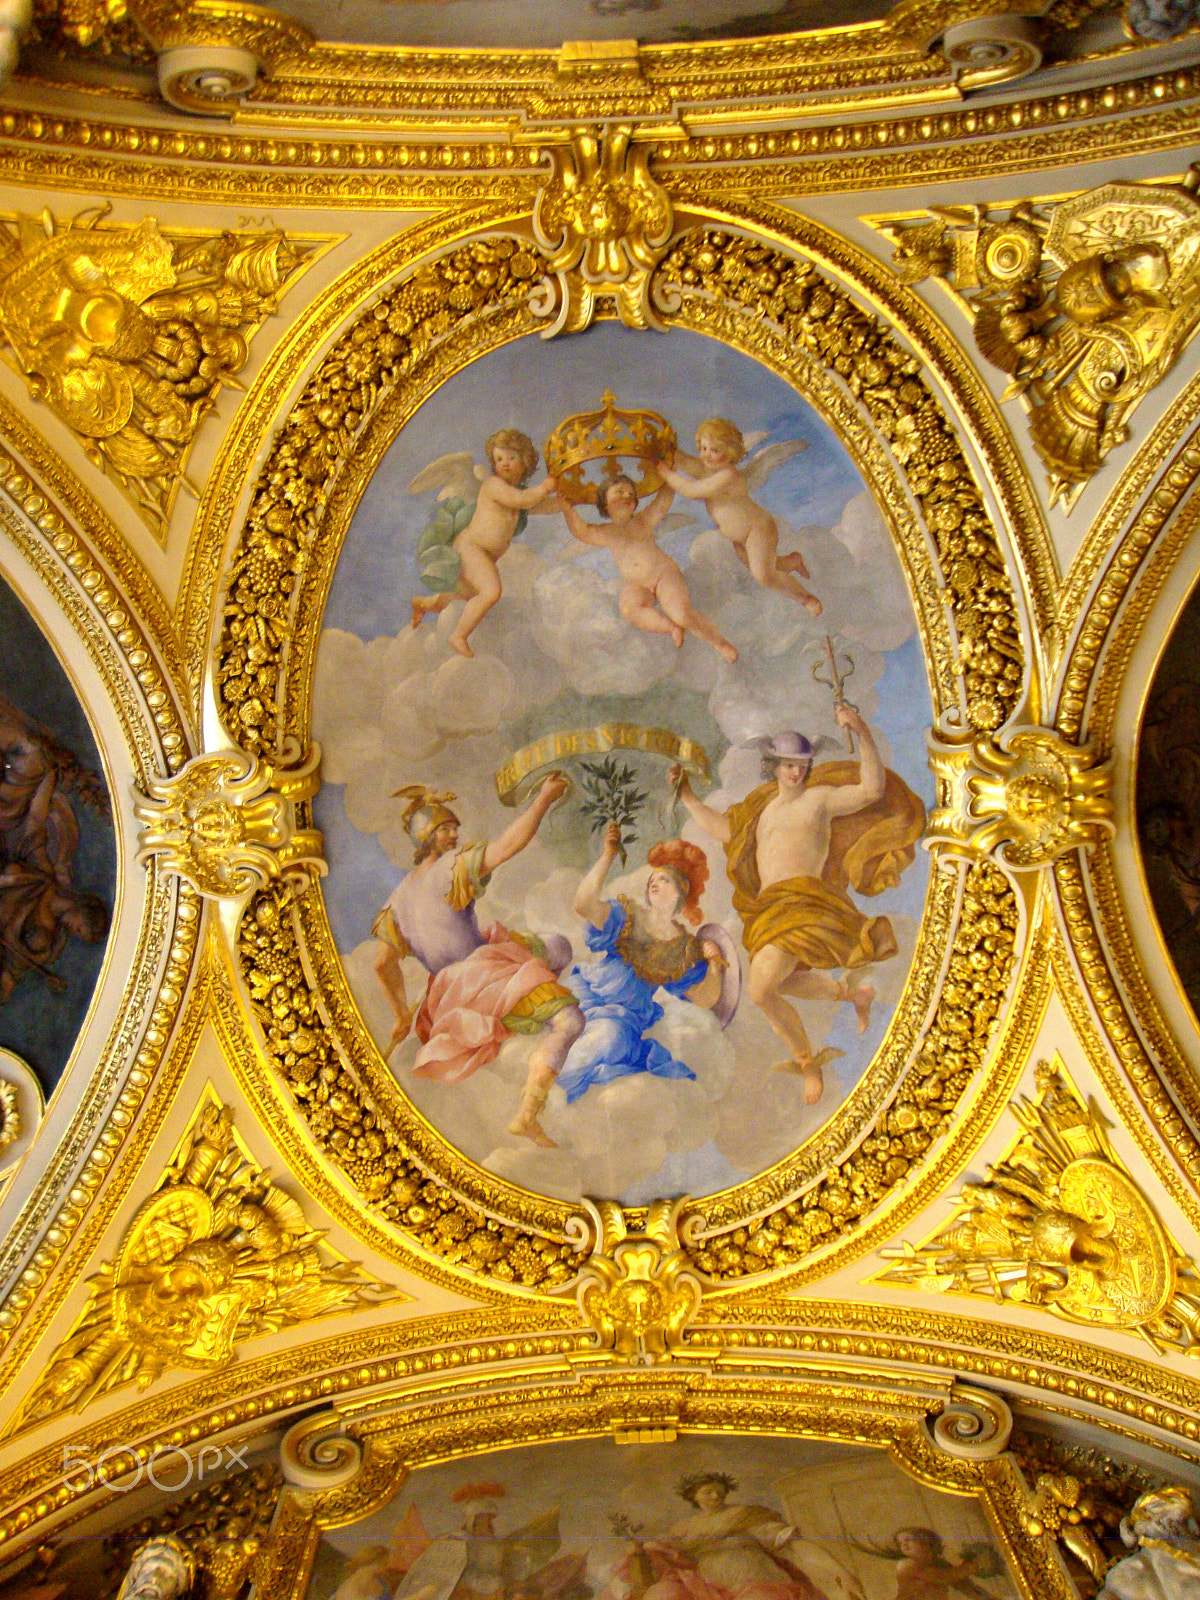 Sony Cyber-shot DSC-W220 sample photo. Palace of versailles ceiling photography